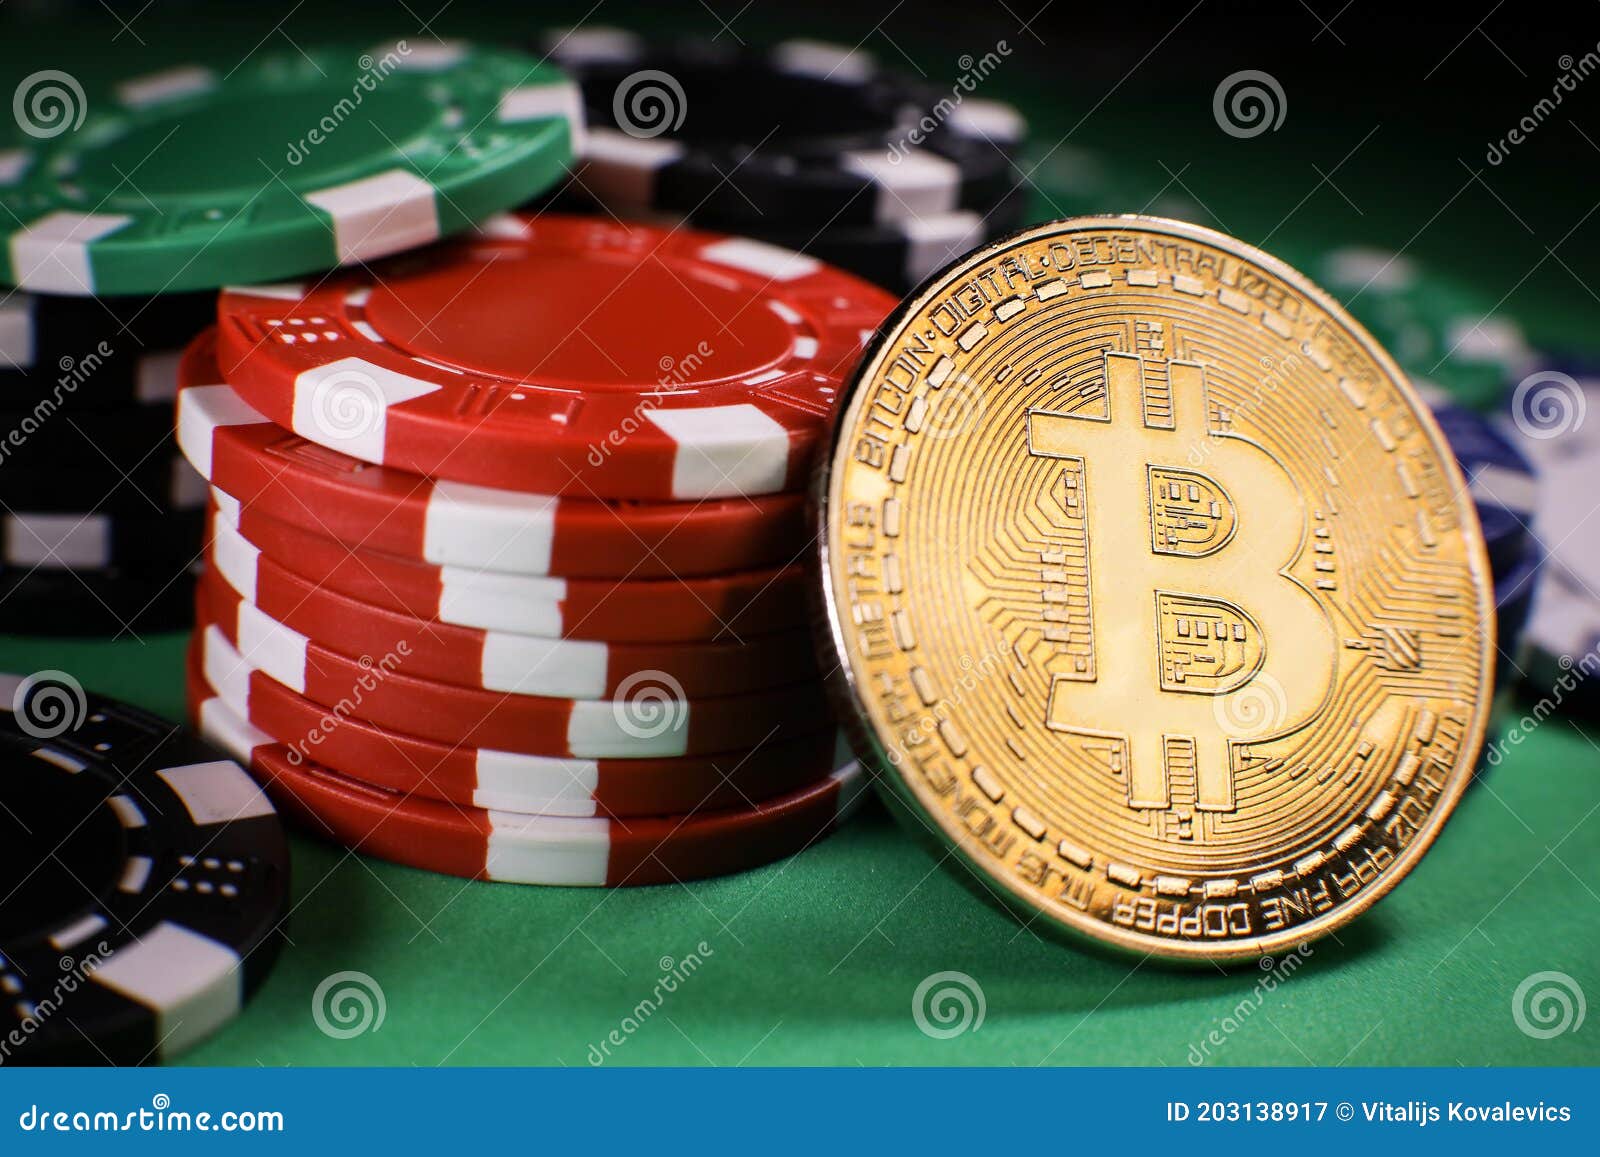 Find Out Now, What Should You Do For Fast bitcoin casino site?